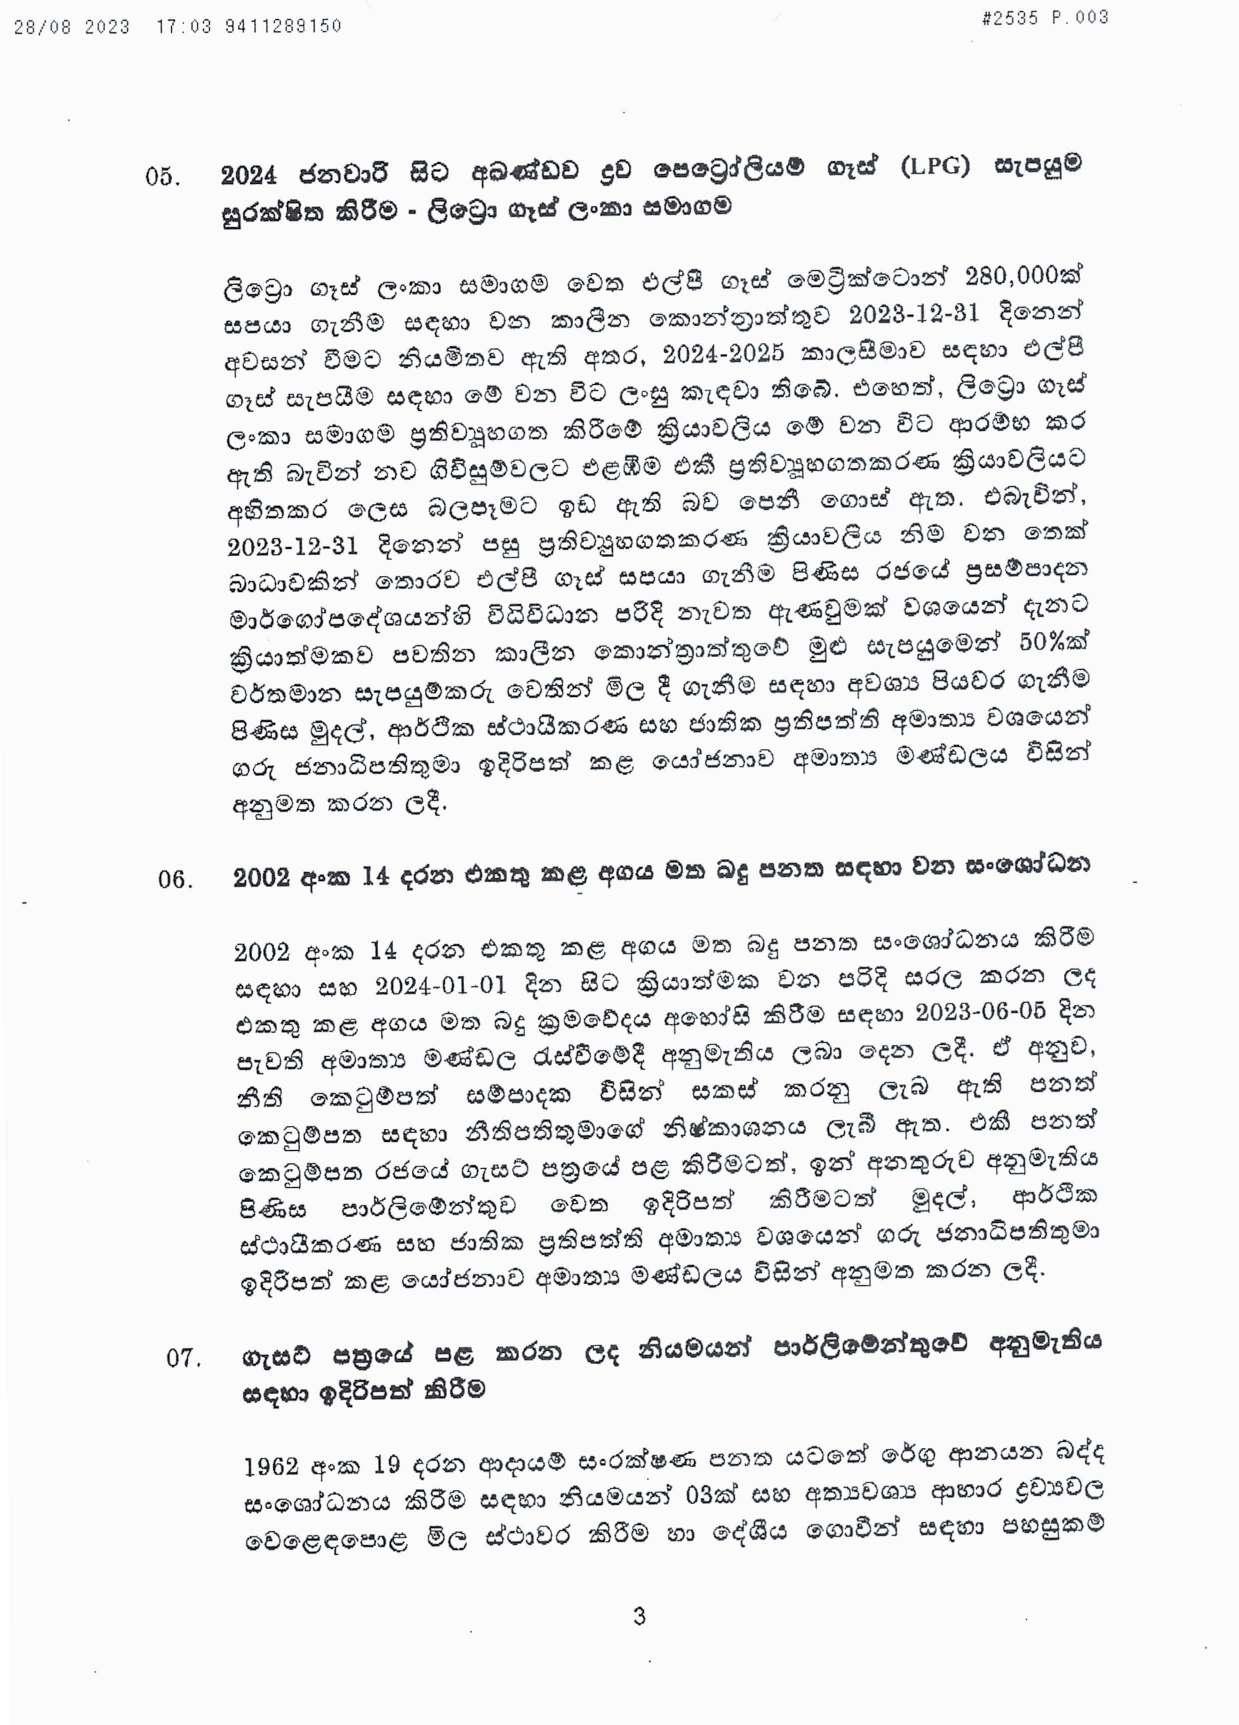 Cabinet Decision on 28.08.2023 1 page 003